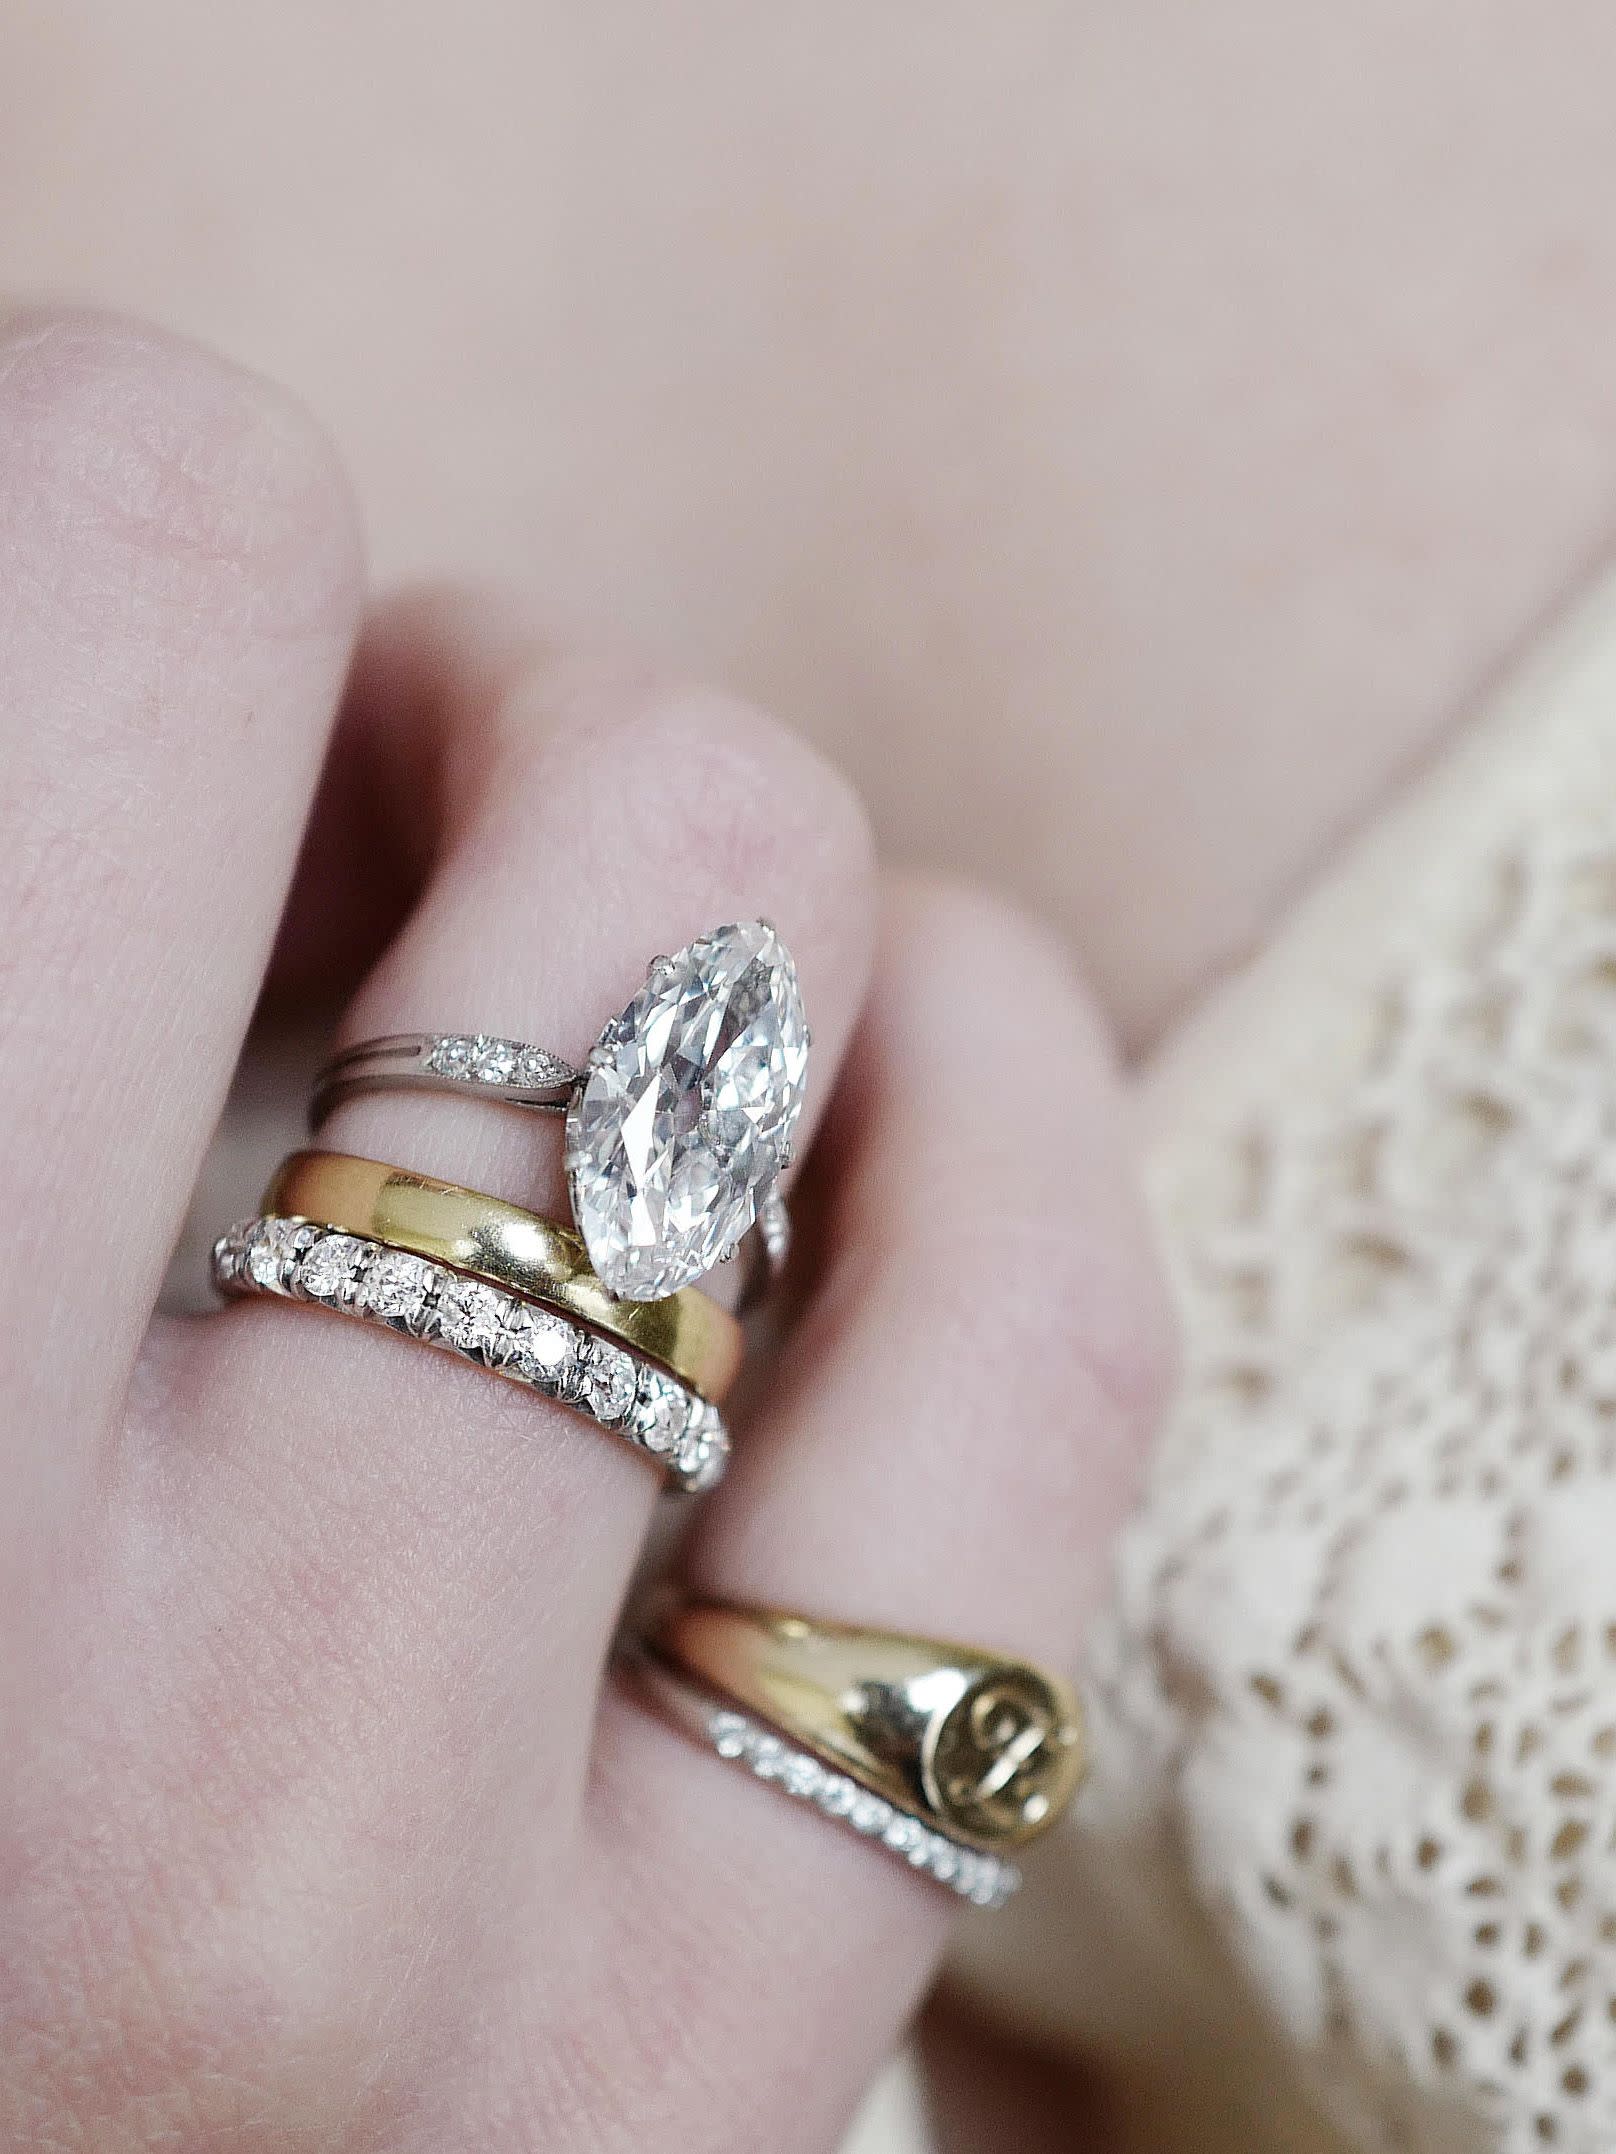  Engagement  Ring  Trends  That Will Die in 2019 